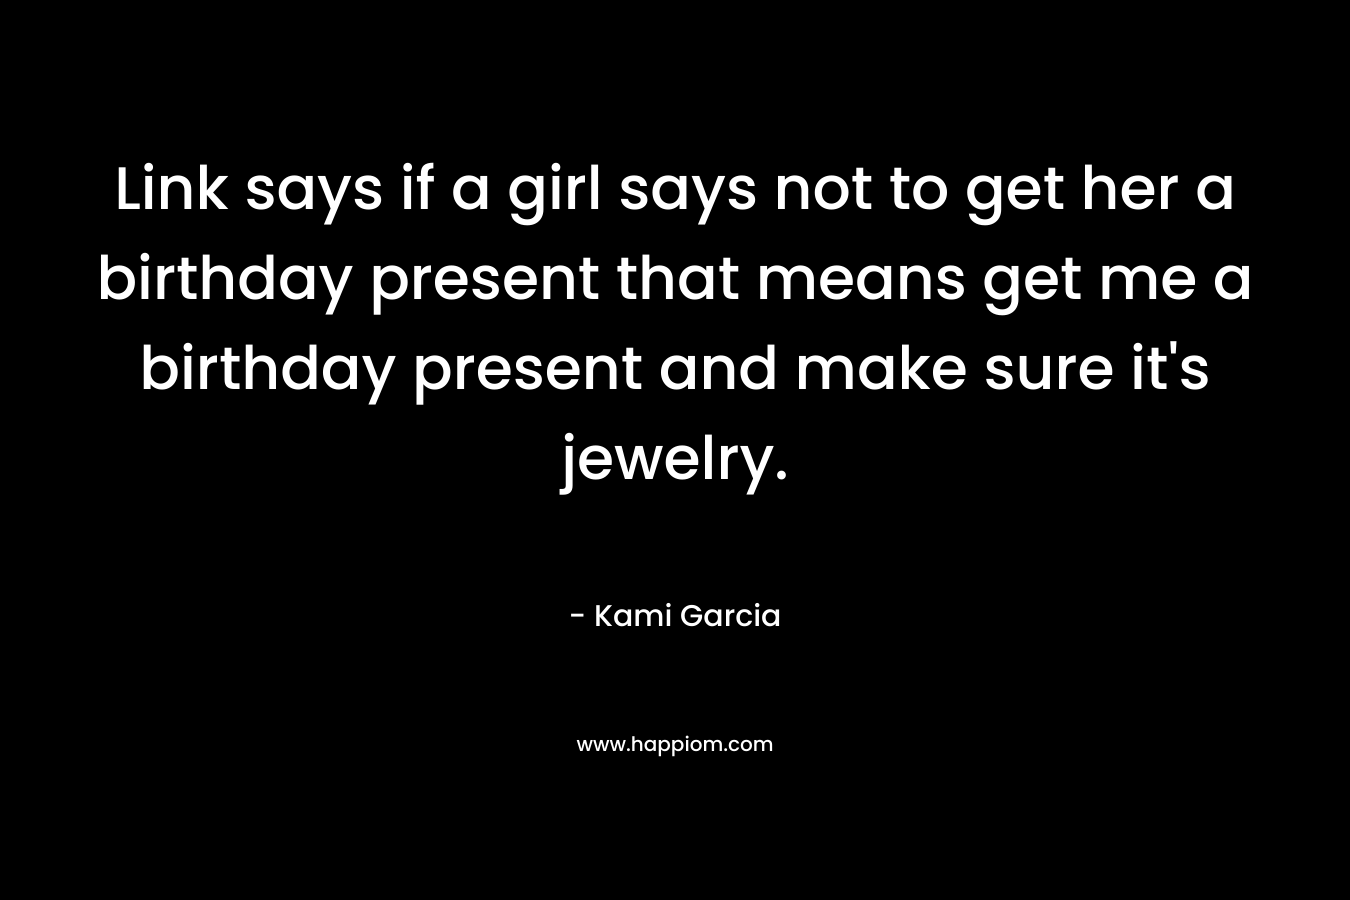 Link says if a girl says not to get her a birthday present that means get me a birthday present and make sure it's jewelry.